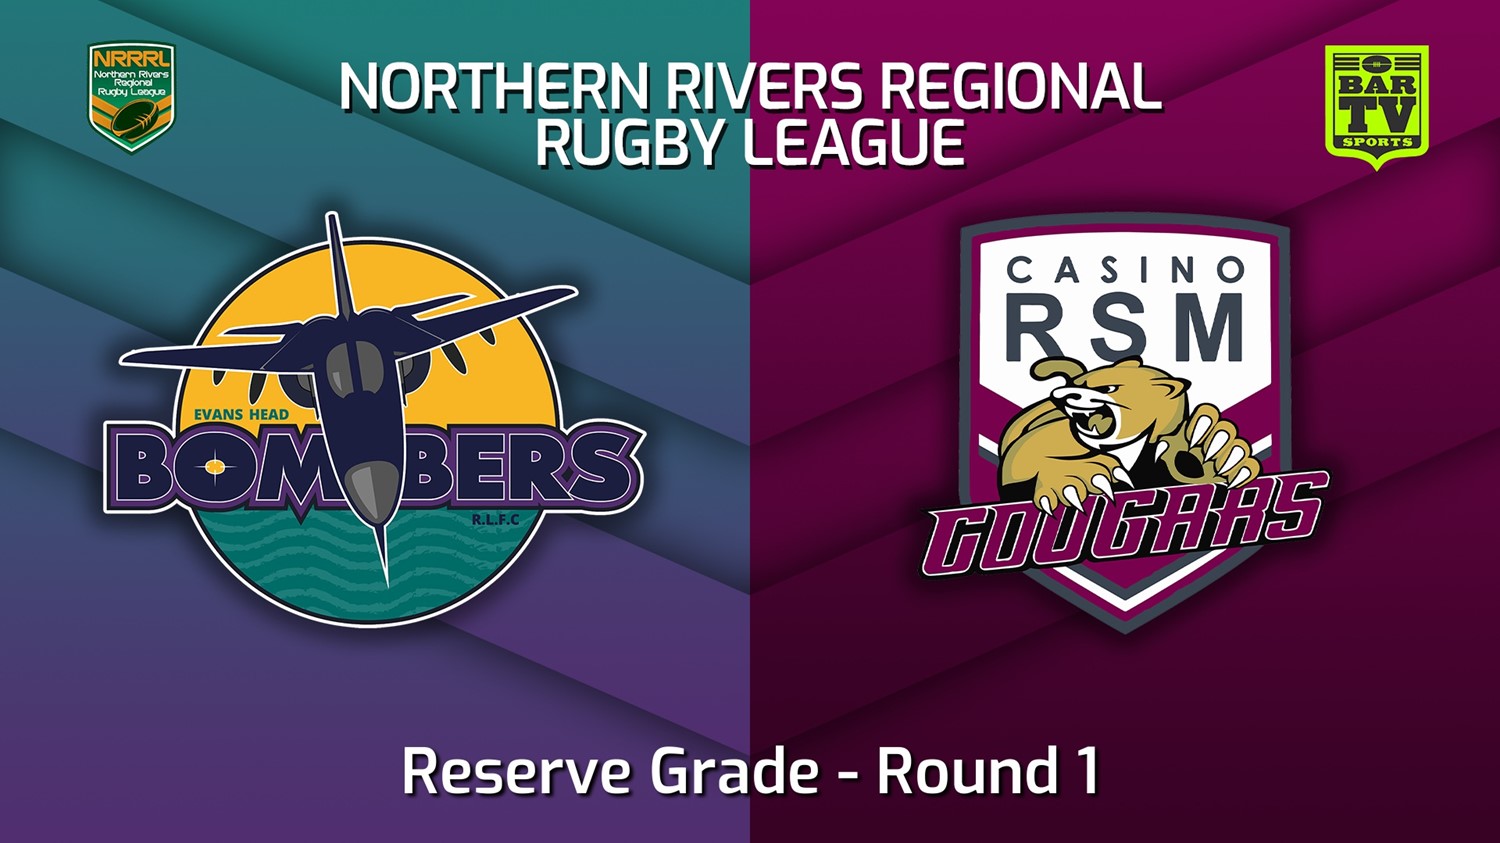 220424-Northern Rivers Round 1 - Reserve Grade - Evans Head Bombers v Casino RSM Cougars Slate Image